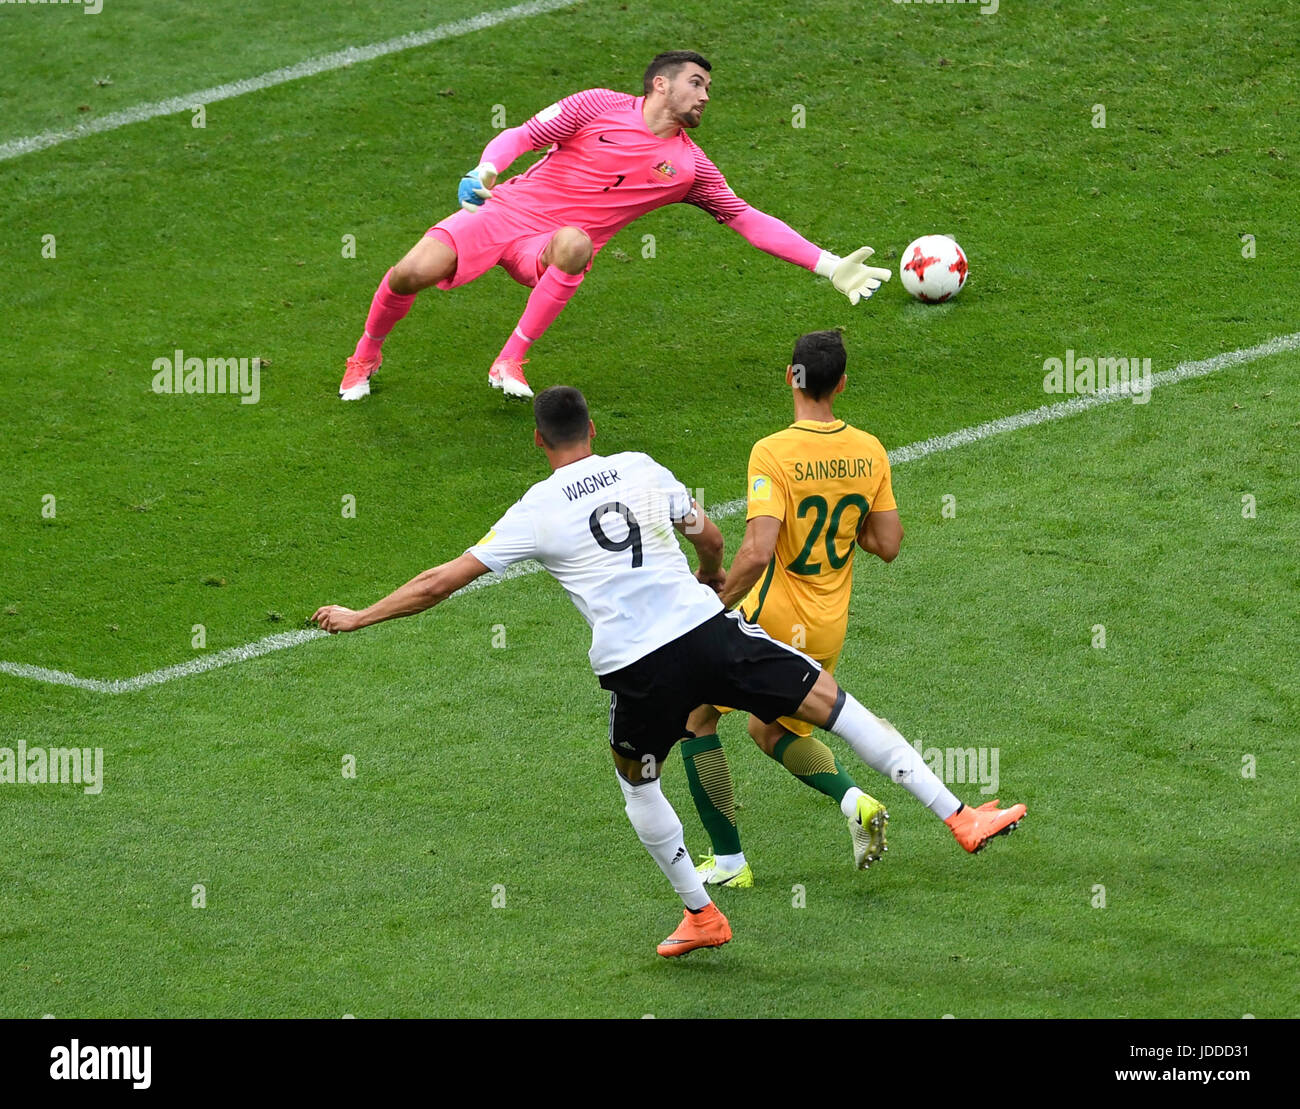 Sochi, Russia. 19th June, 2017. Australia's goalkeeper Maty Ryan (L) and teammate Trent Sainsbury (R) attempt to block a shot on goal by Germany's Sandro Wagner during the Confederations Cup group stages Group B match in the Fisht Stadium in Sochi, Russia, 19 June 2017. Photo: Marius Becker/dpa/Alamy Live News Stock Photo